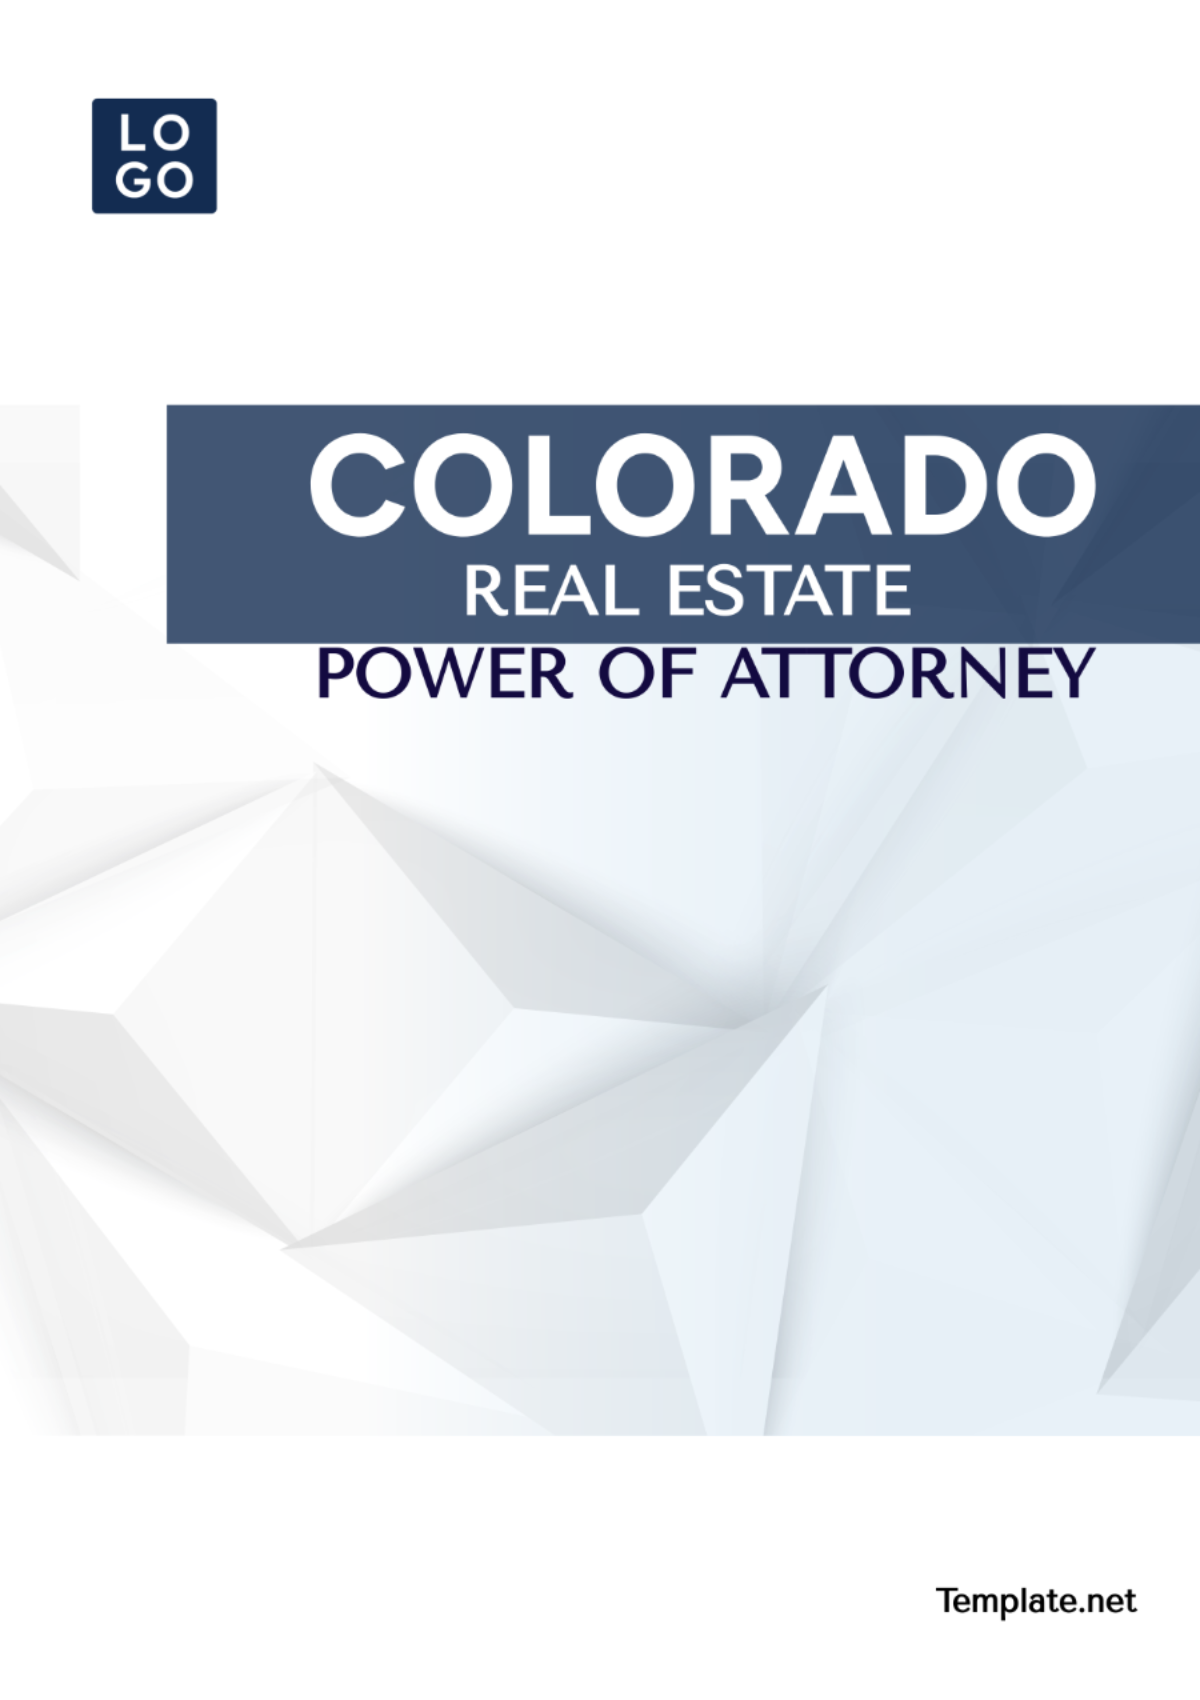 Free Colorado Real Estate Power of Attorney Template